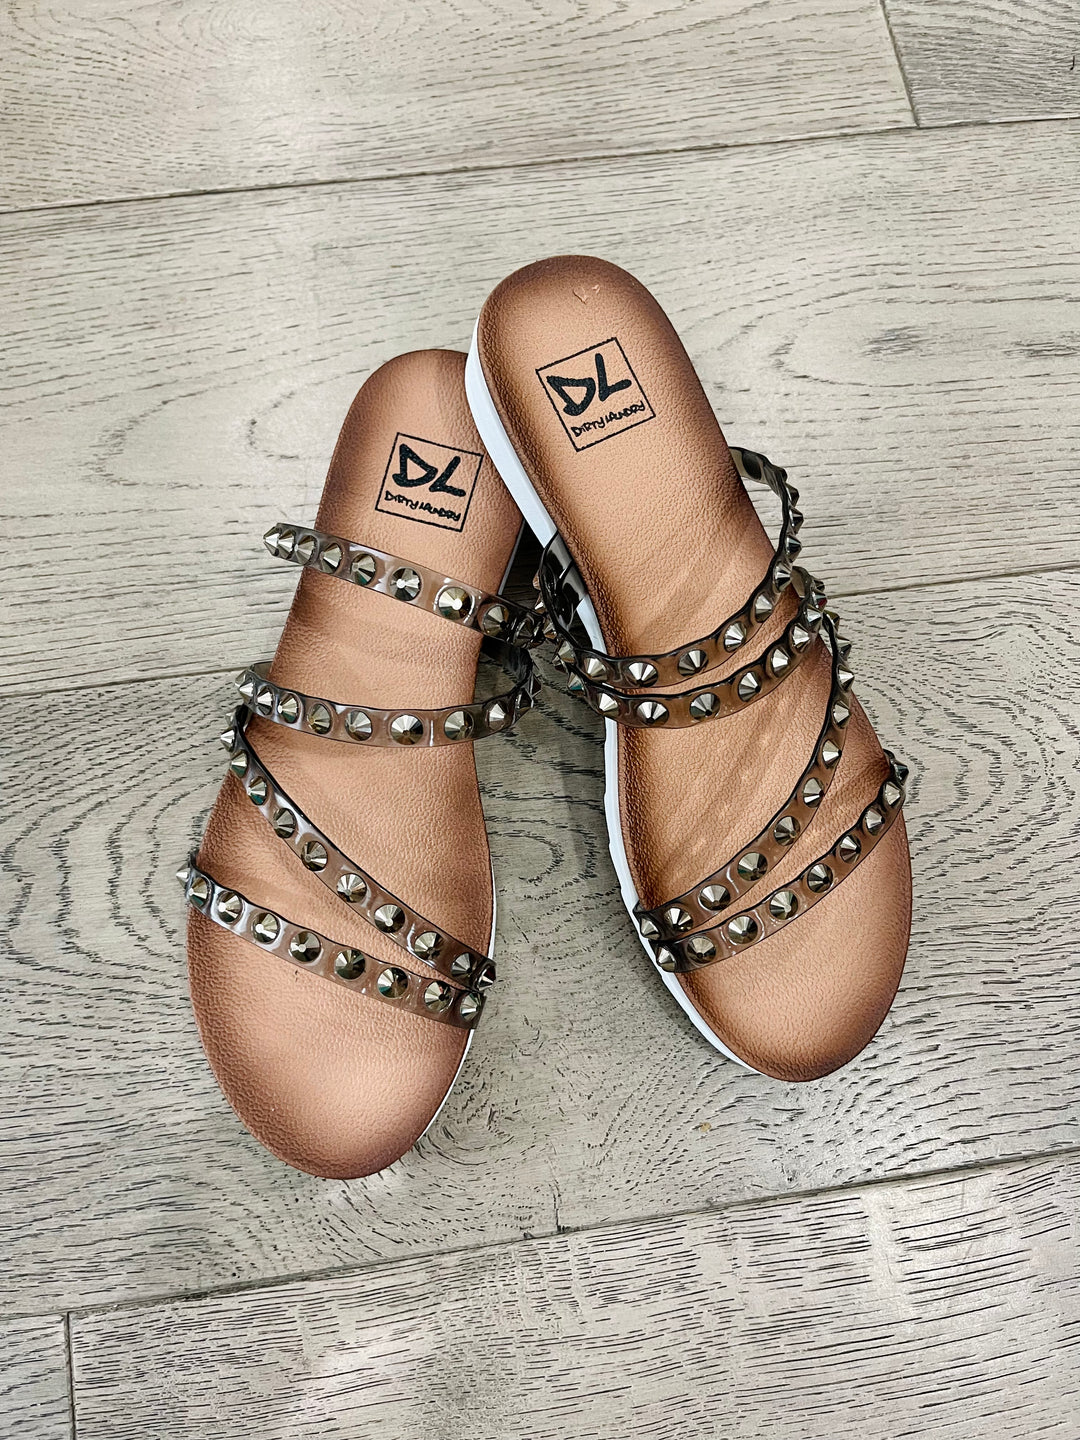 Dirty Laundry Coral reef sandal- pewter